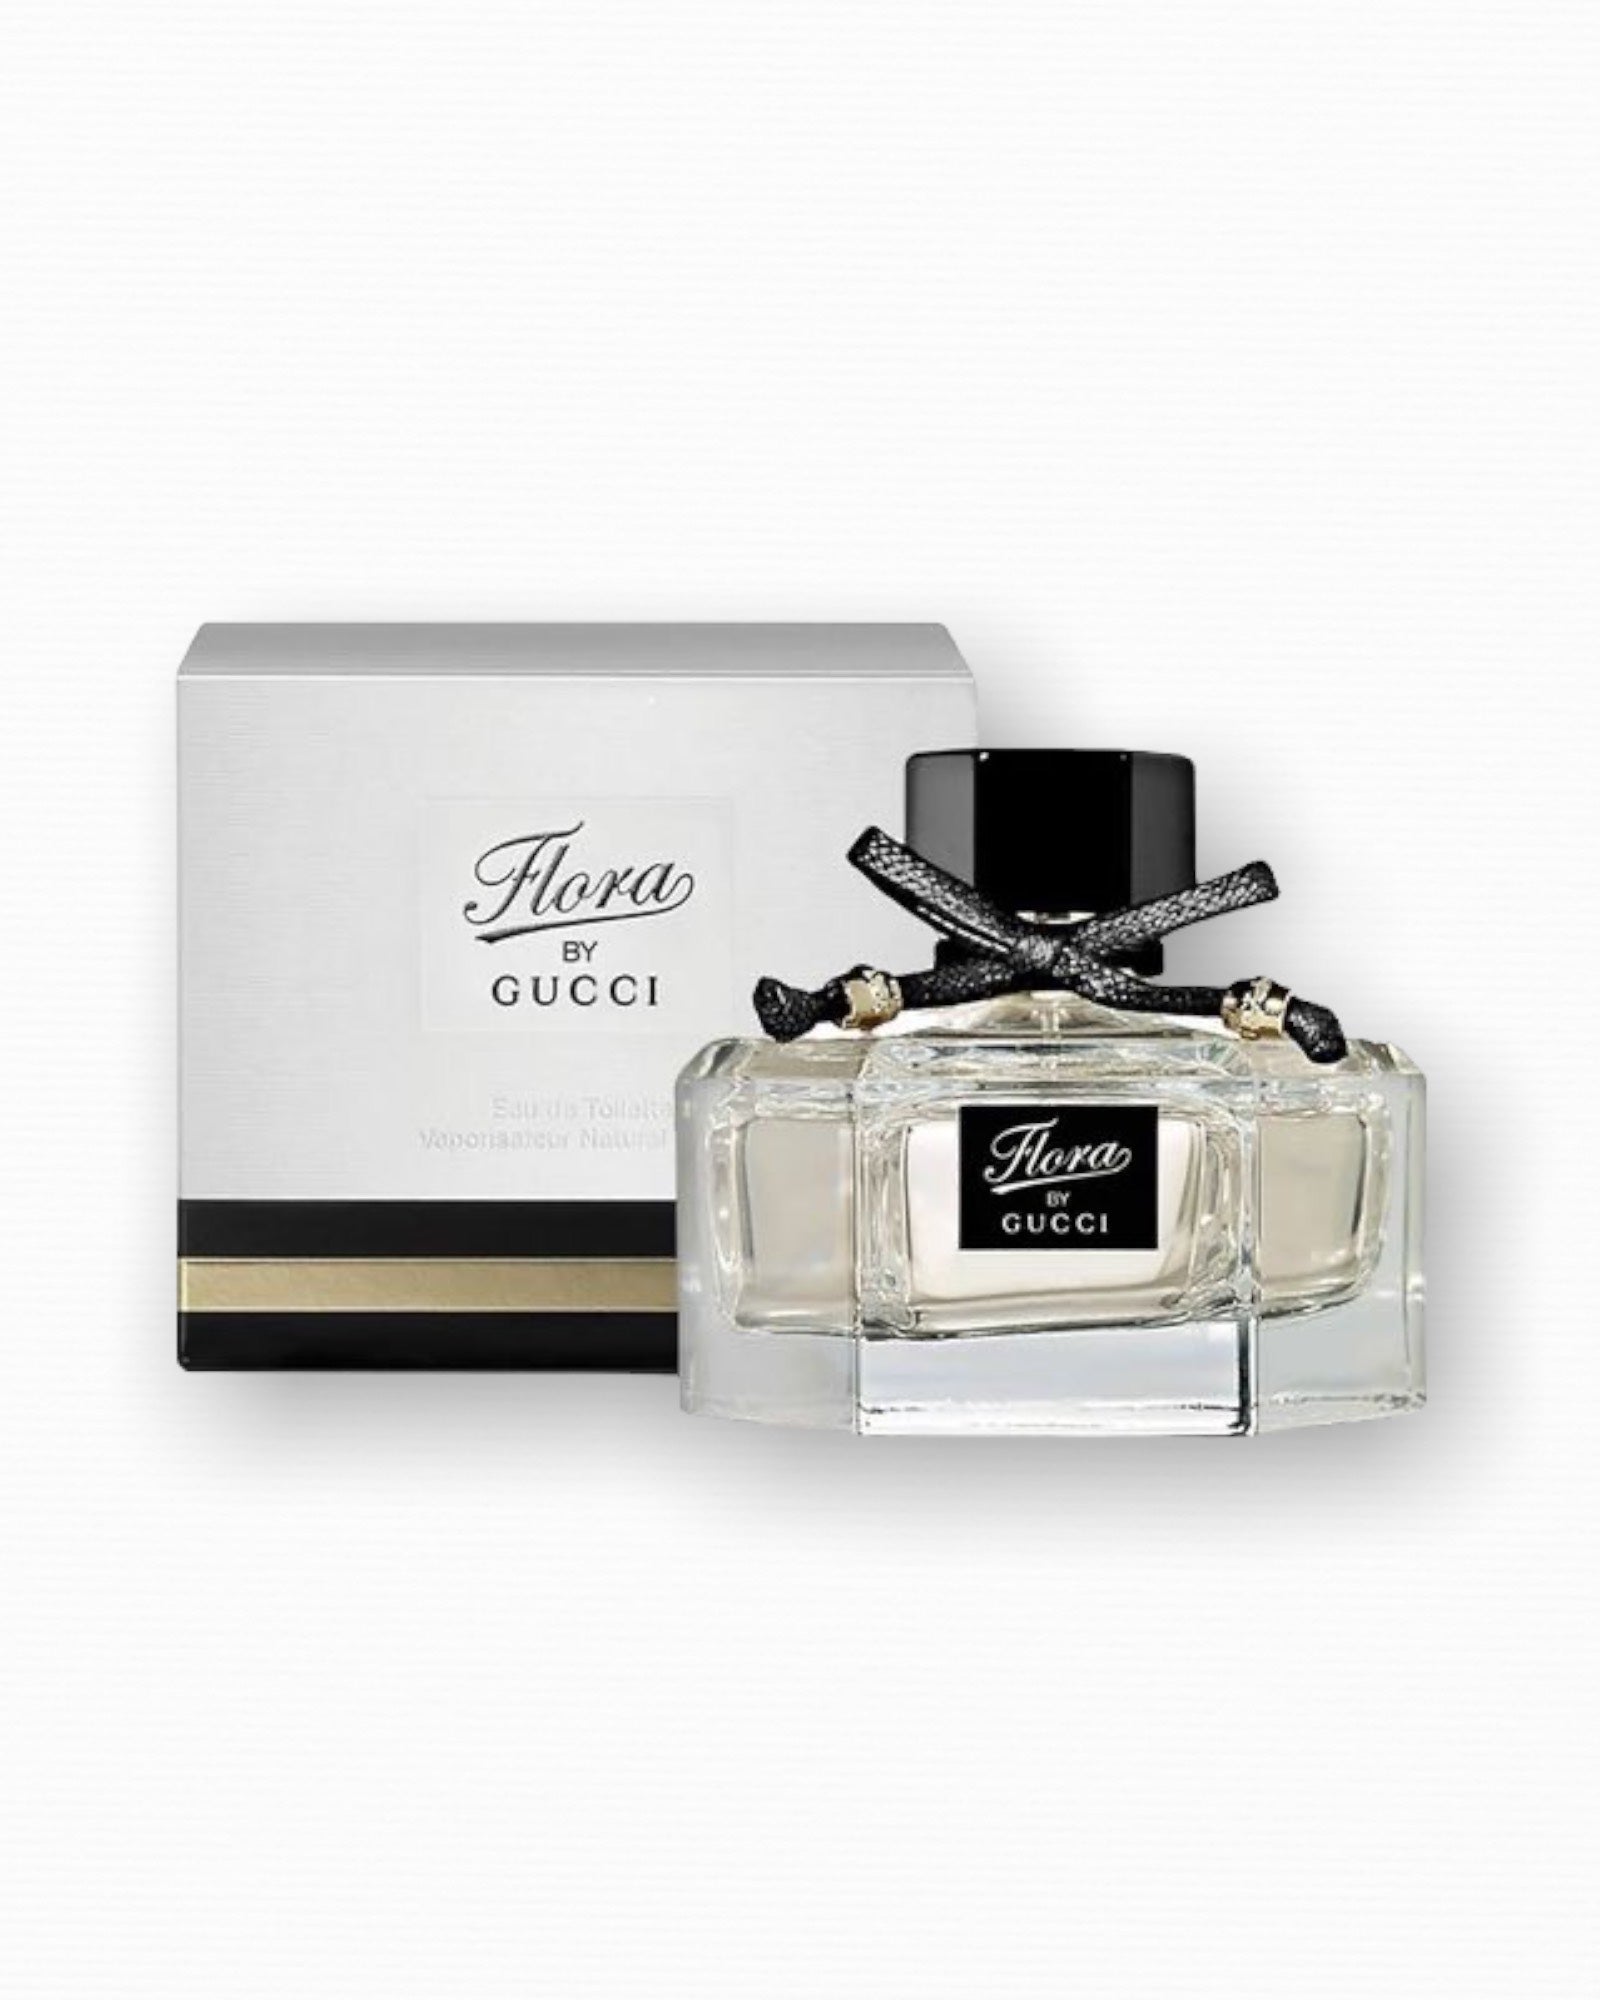 Flora by Gucci for Women EDT 1.0 oz